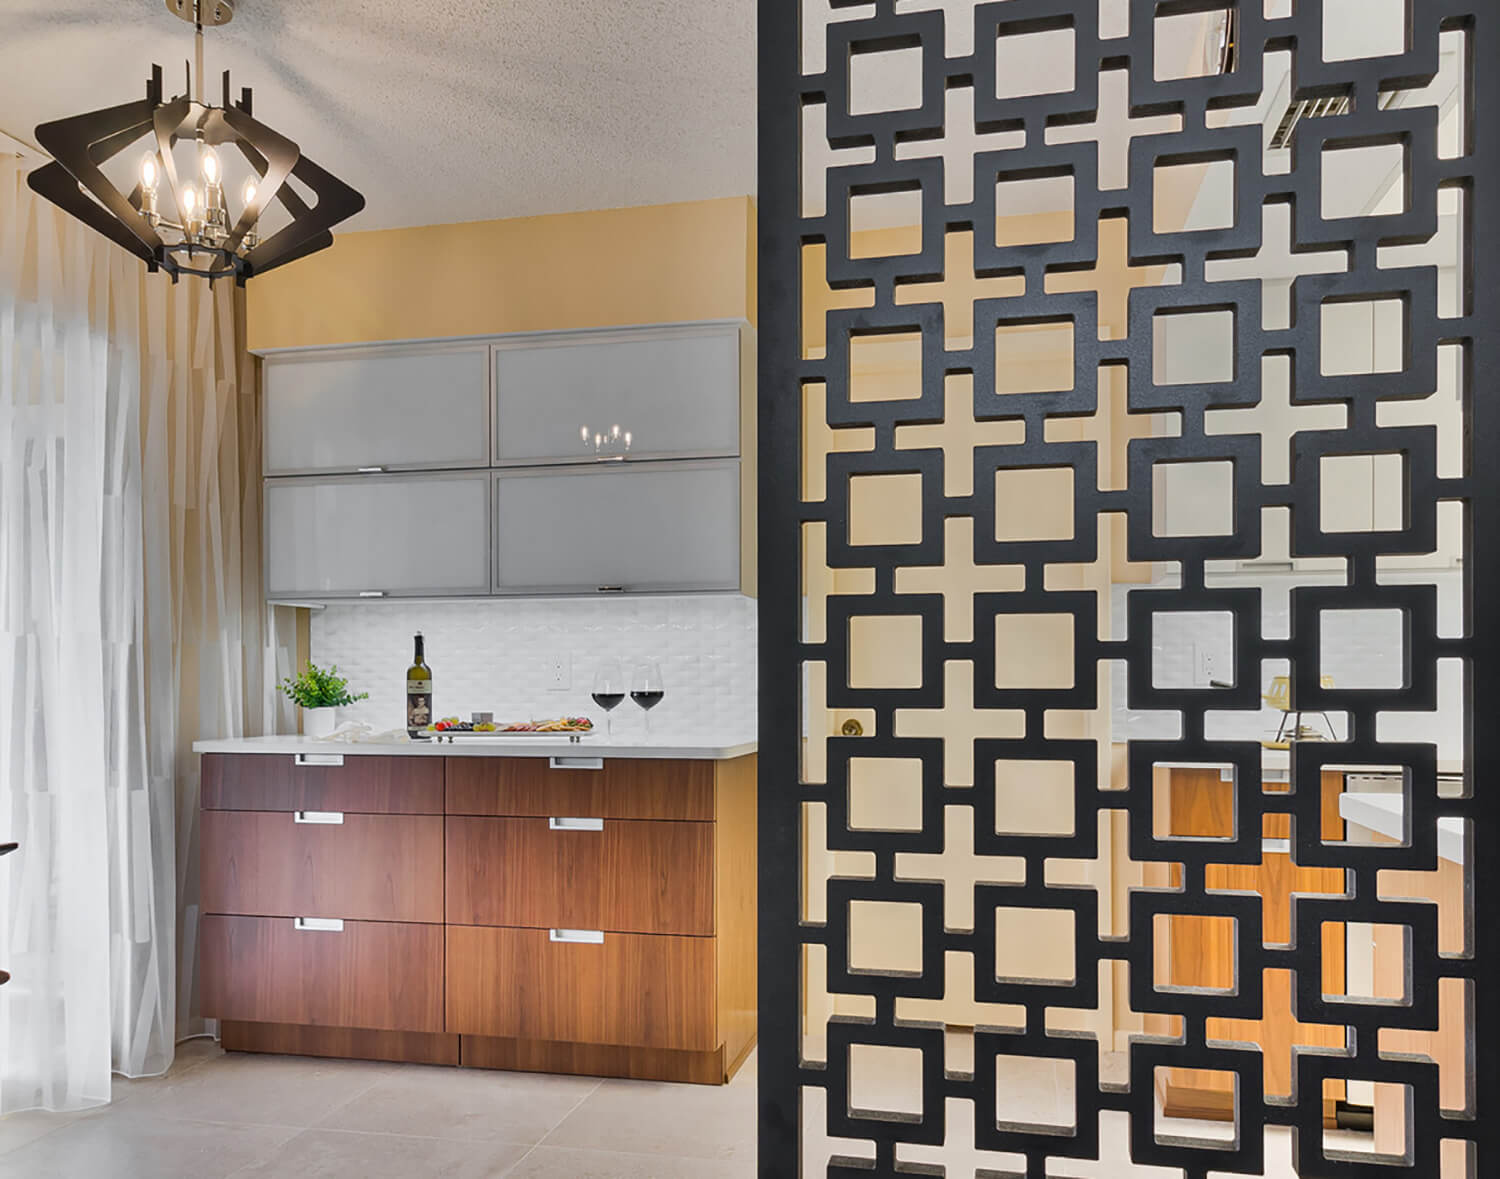 A mid-century modern styled kitchen design using geometric shapes as accents.